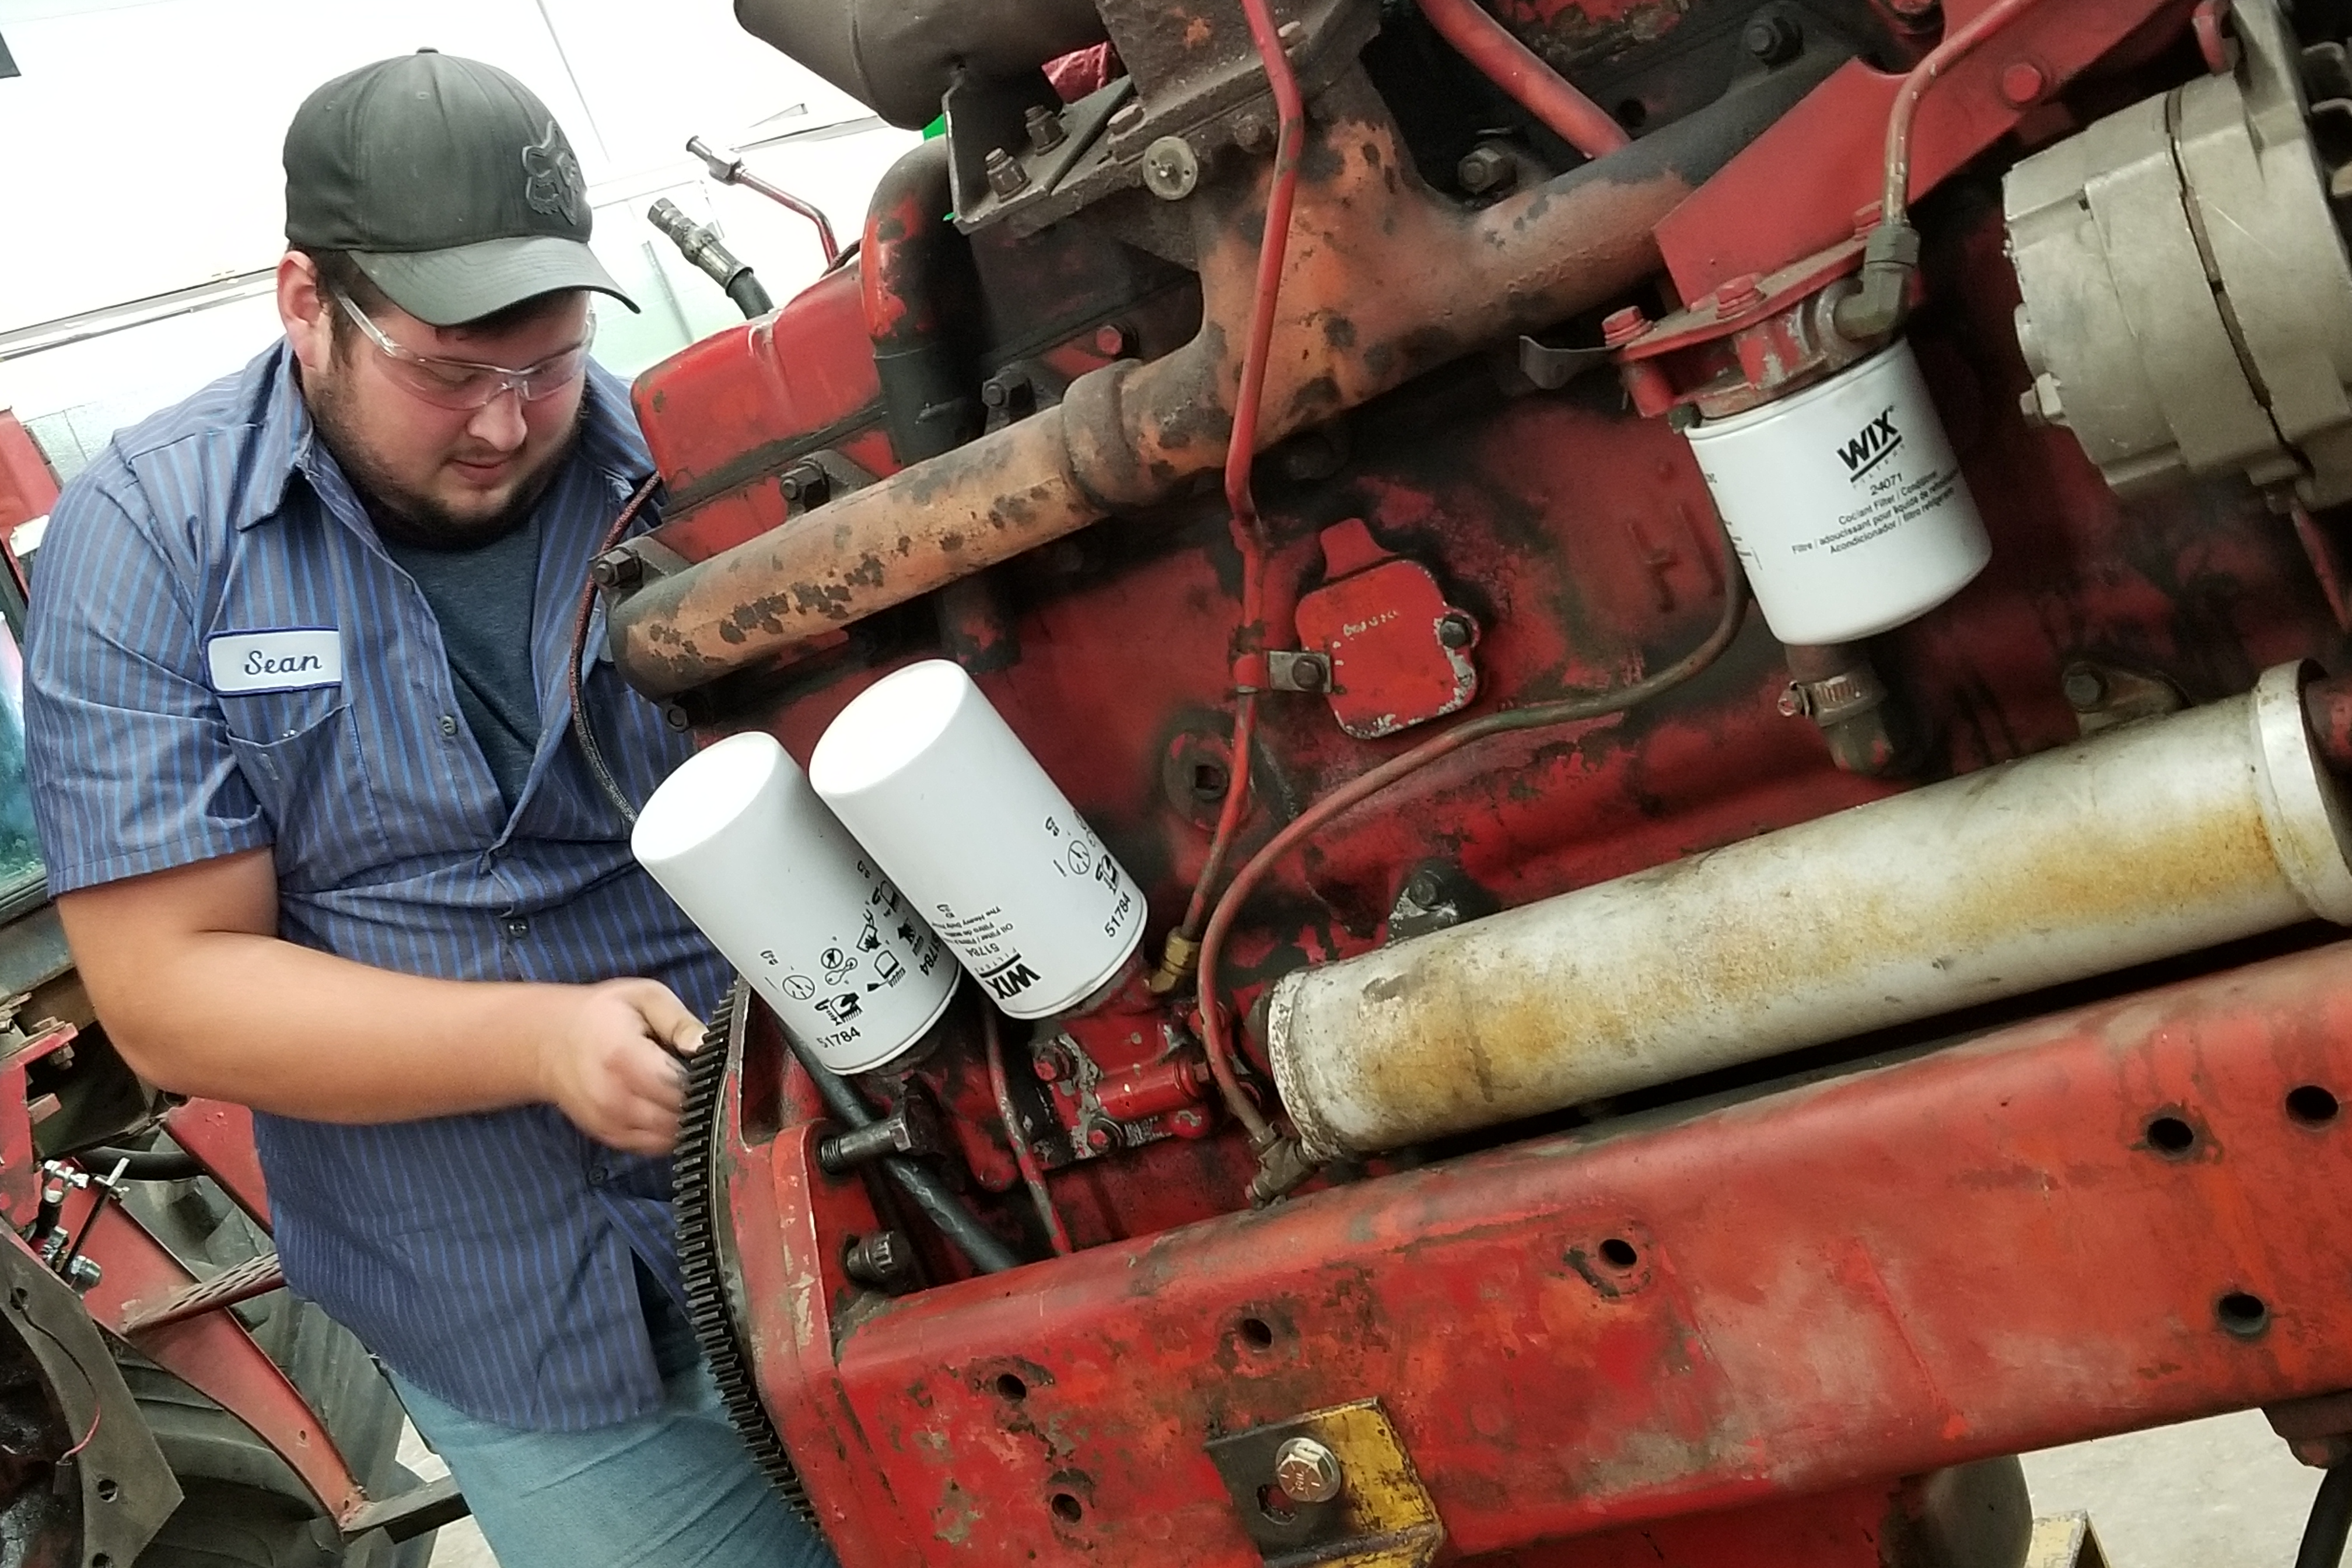 Advanced Diesel Technology student works on a diesel tractor for a community member